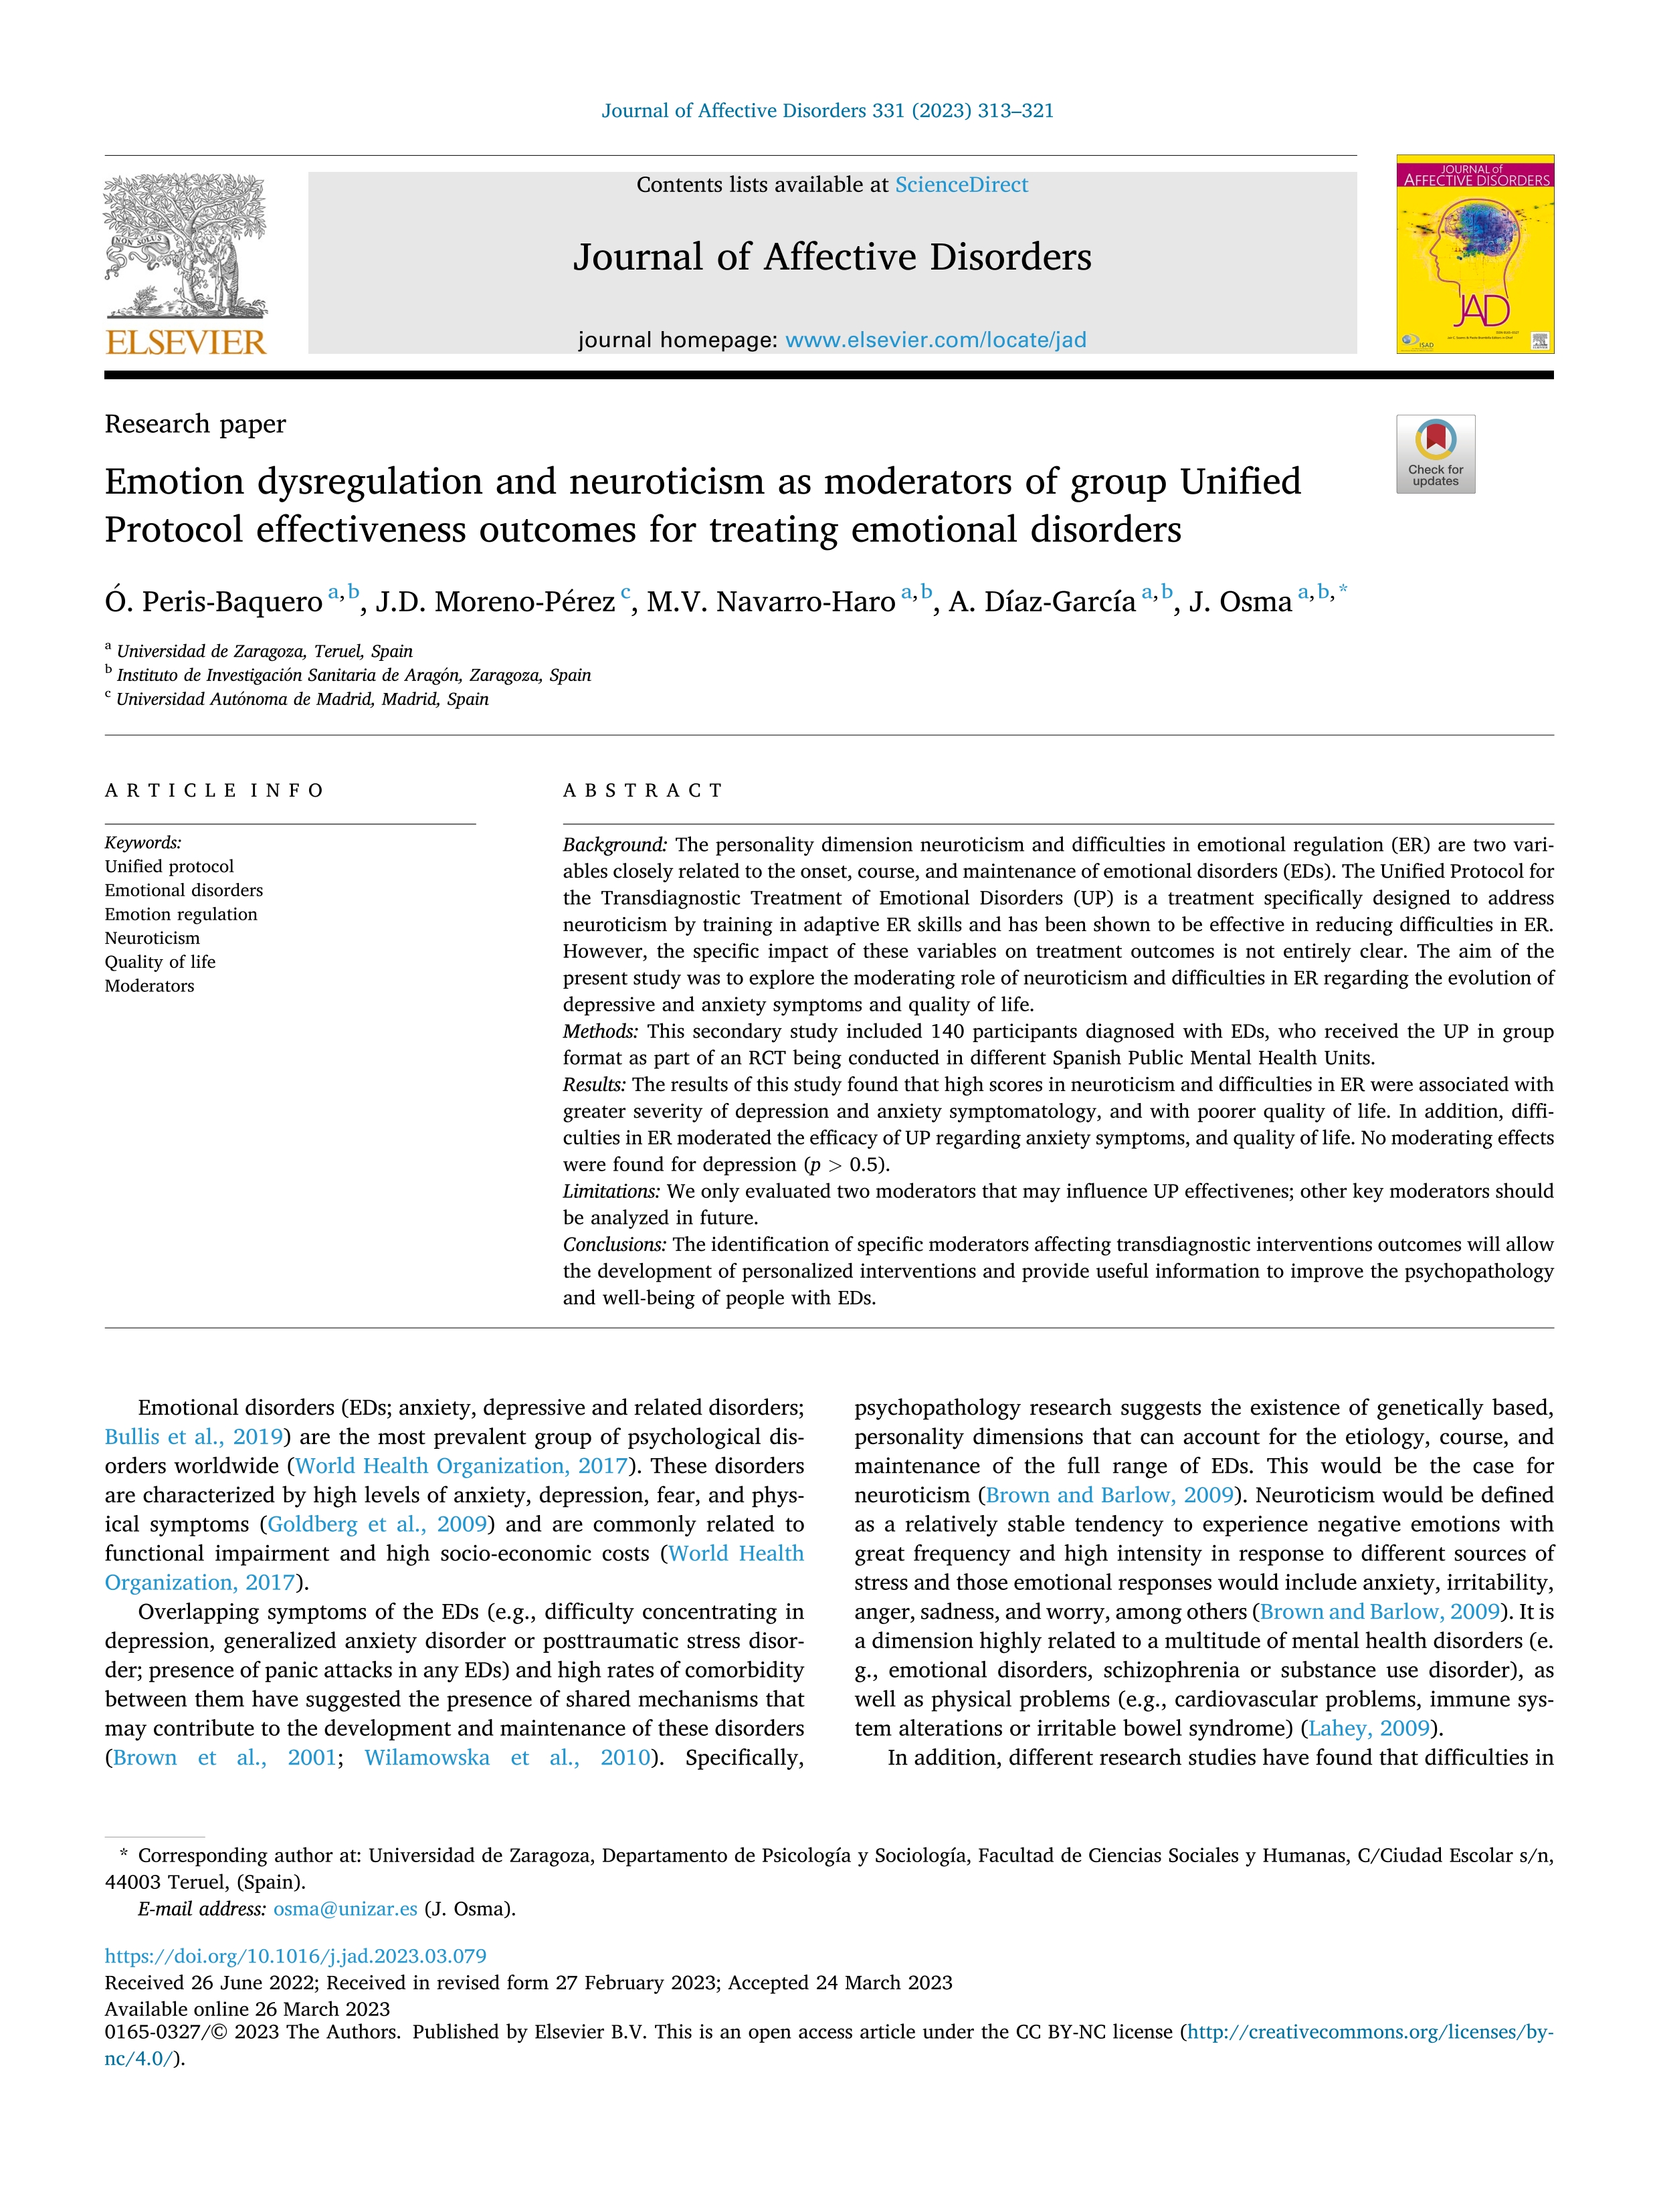 Emotion dysregulation and neuroticism as moderators of group Unified Protocol effectiveness outcomes for treating emotional disorders